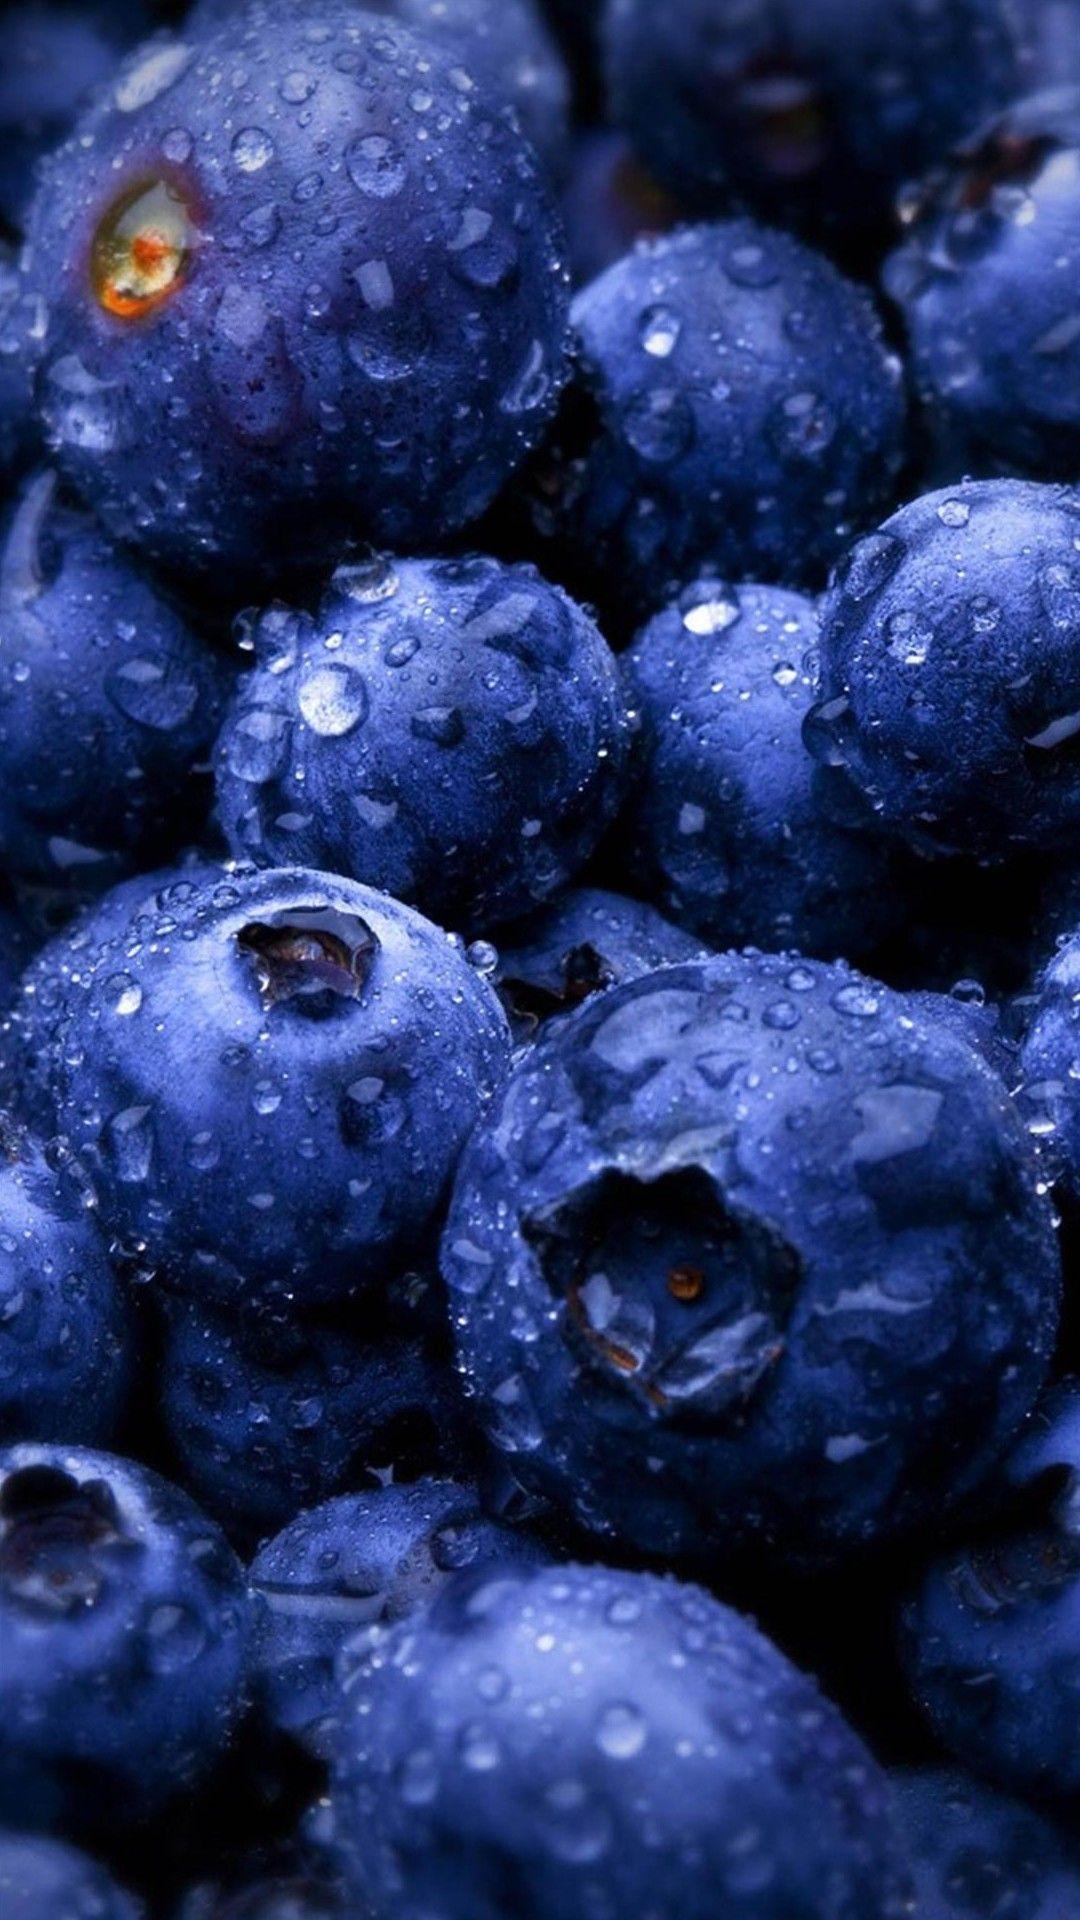 HD Blueberries Fruit Water Drops Android Wallpaper. Blue